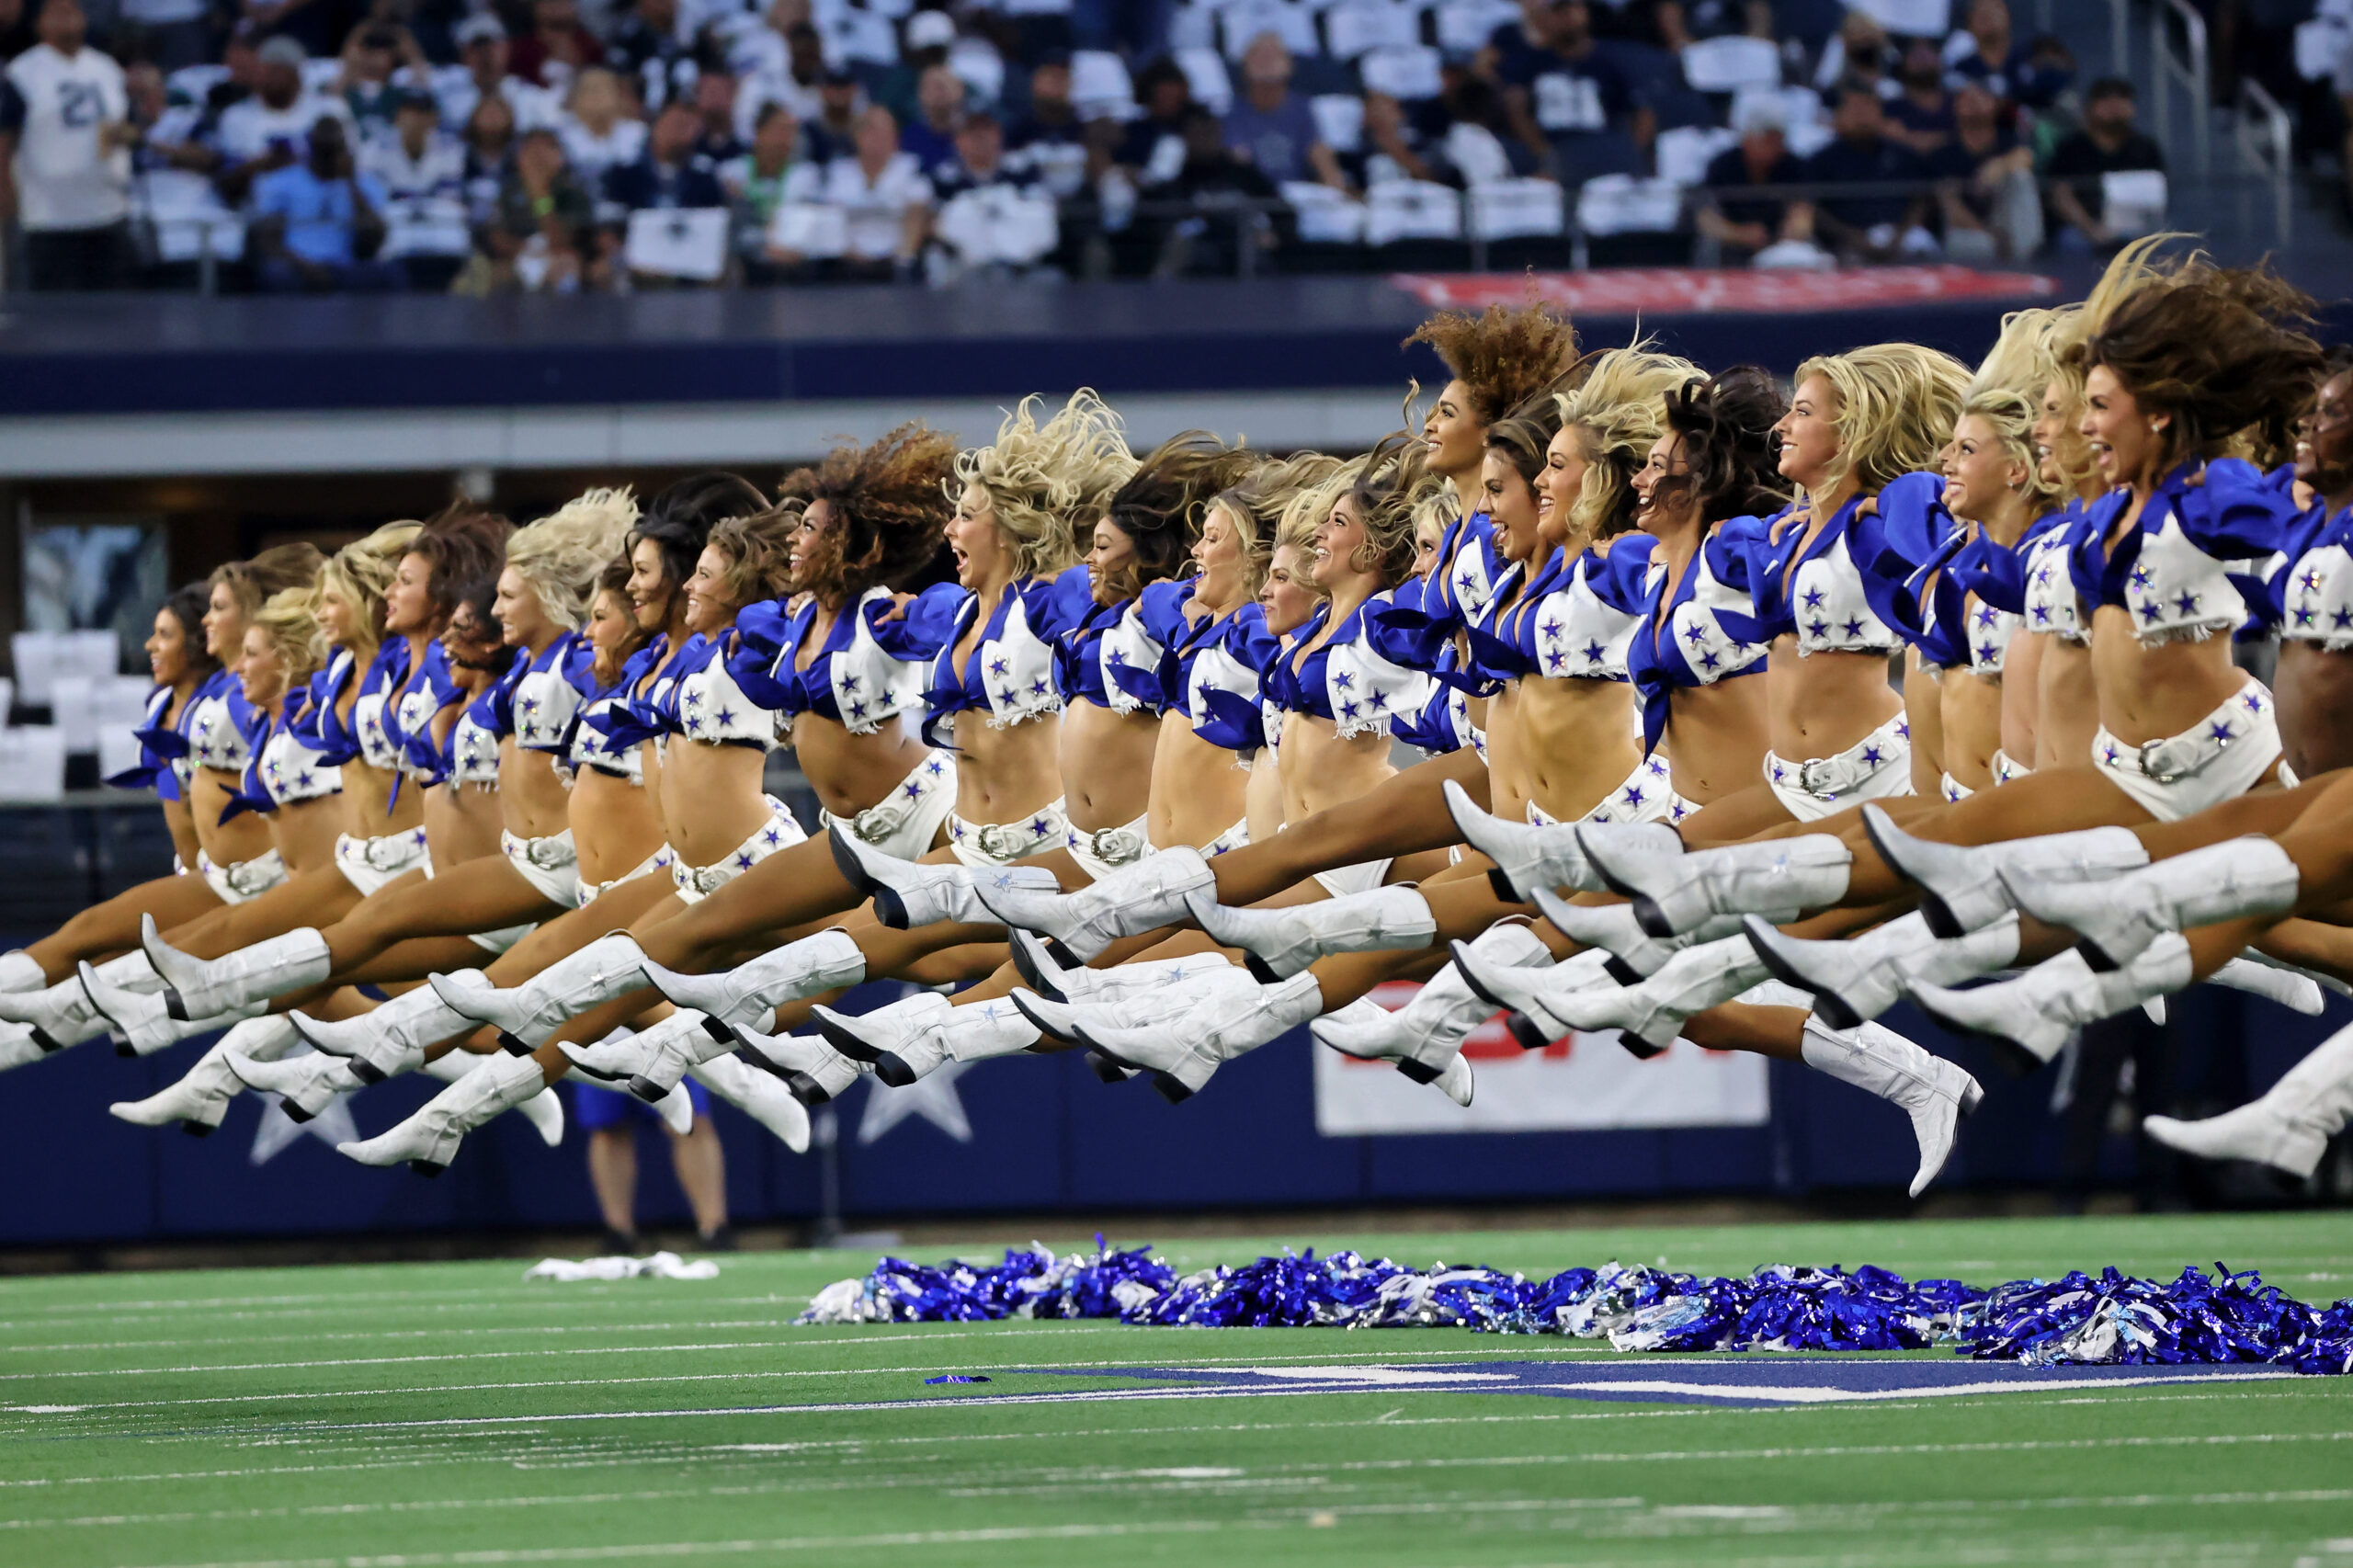 What to Stream This Weekend Featuring Orphan Black Dallas Cowboys Cheerleaders and More